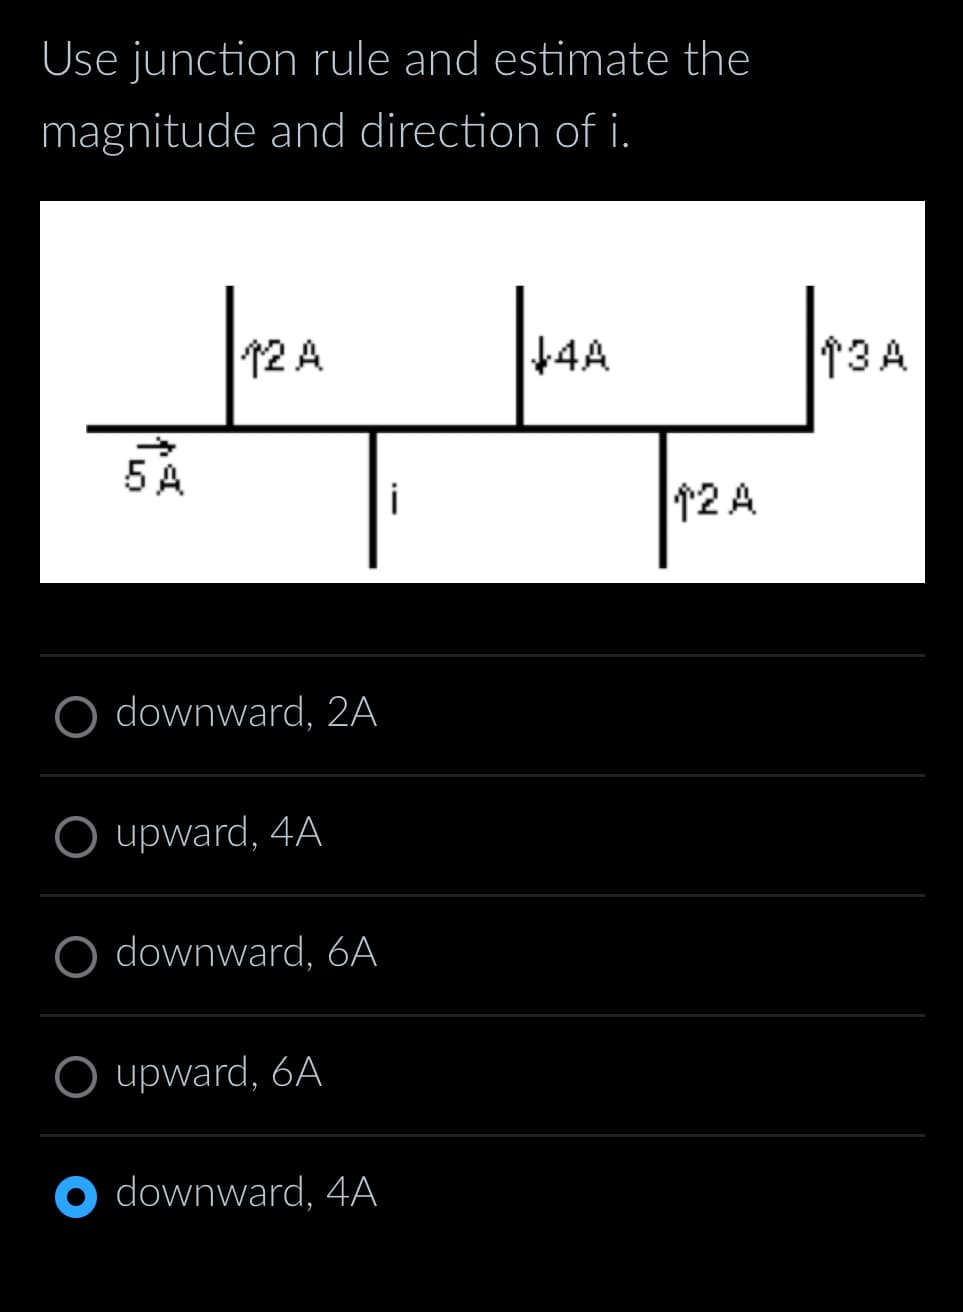 Use junction rule and estimate the
magnitude and direction of i.
12 A
+4A
5 A
i
O downward, 2A
O upward, 4A
○ downward, 6A
O upward, 6A
O downward, 4A
12 A
13A